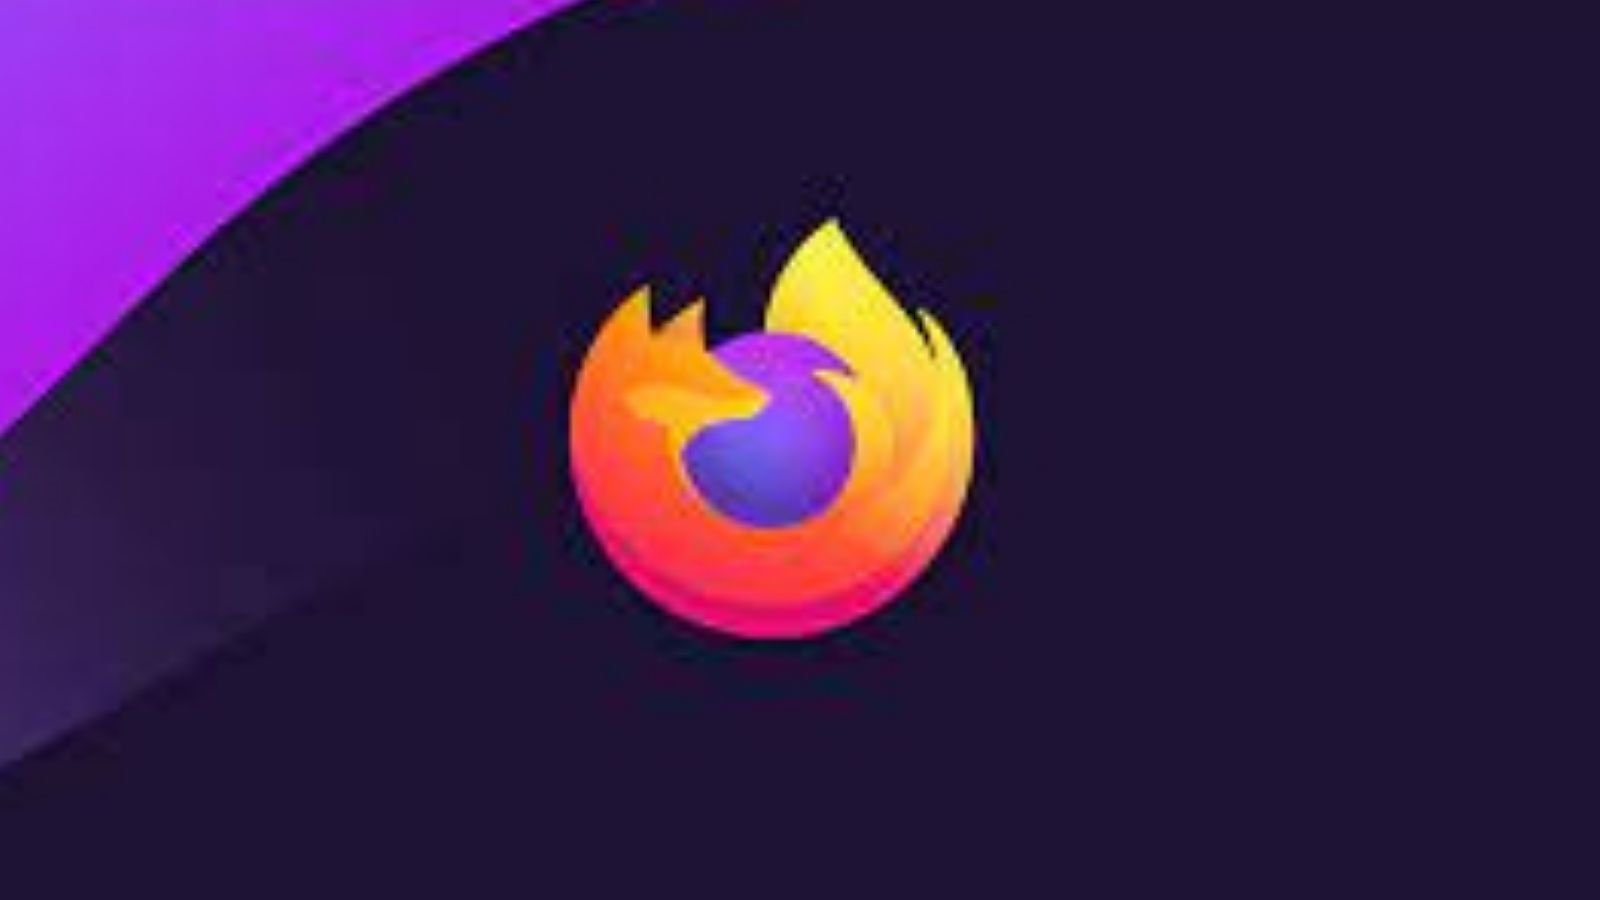 firefox 18 download for mac